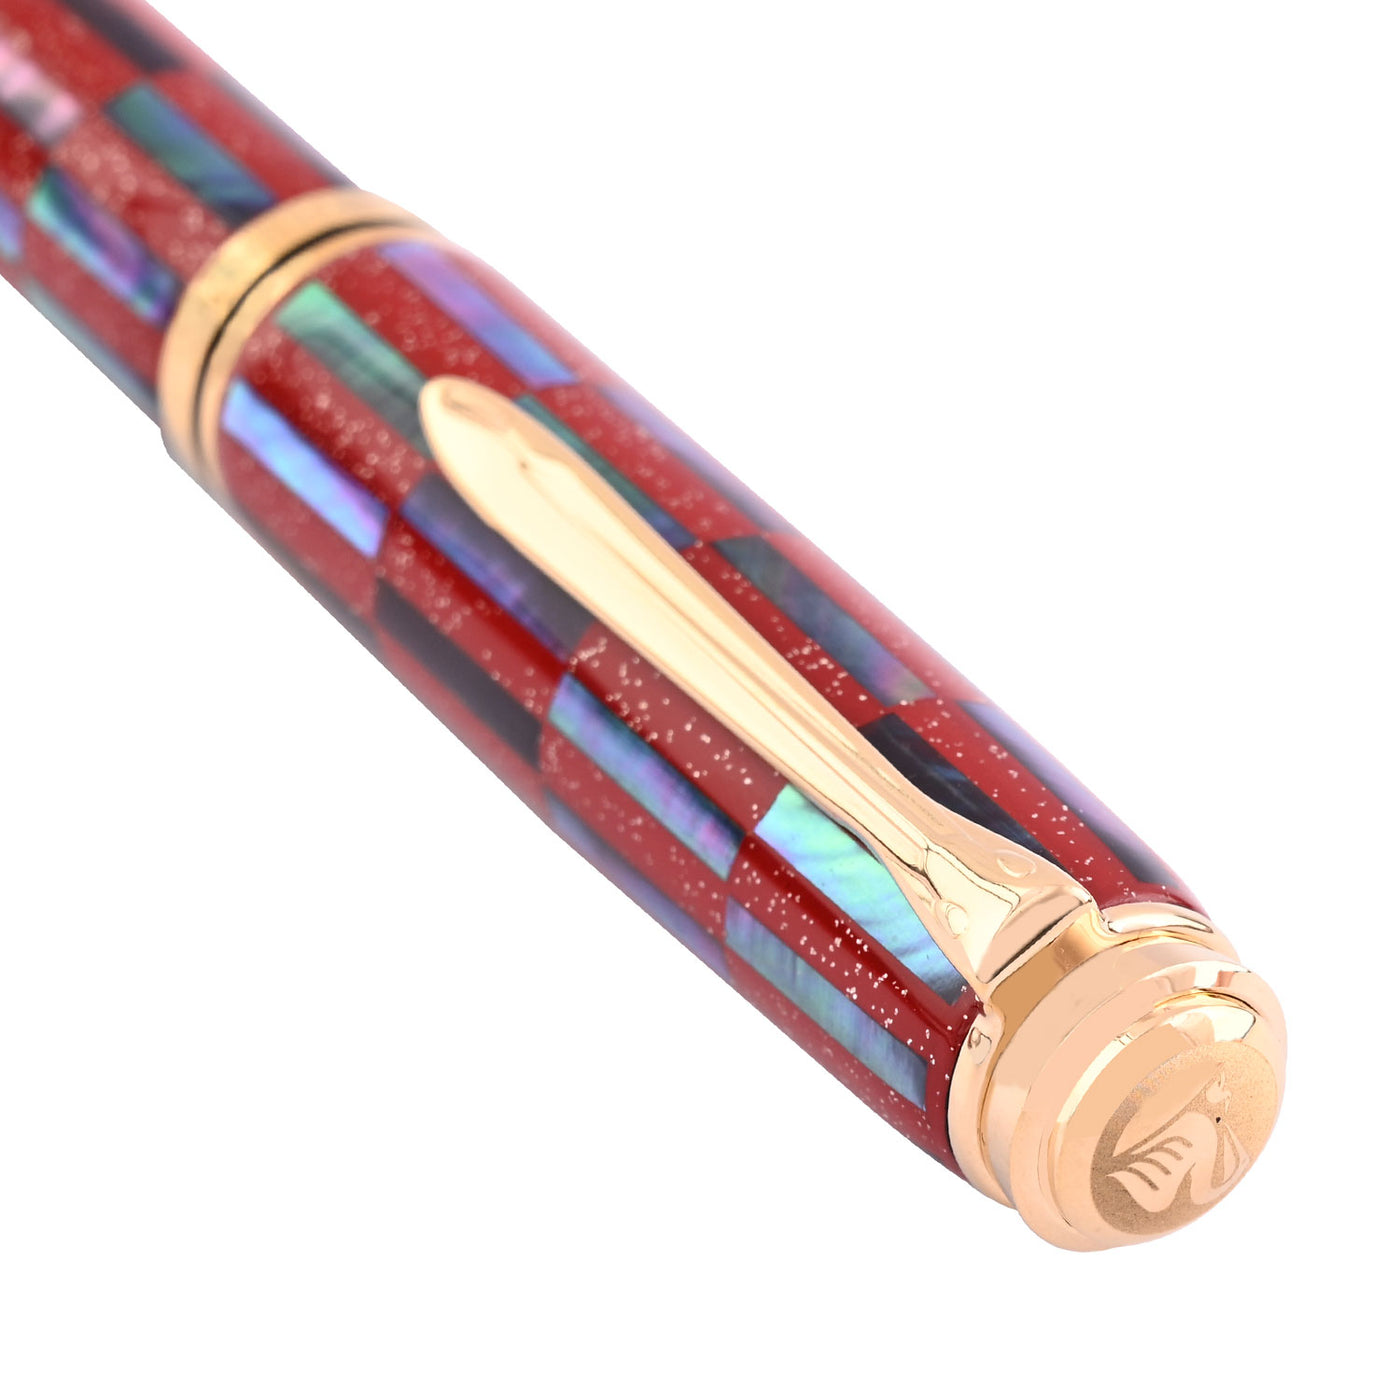 Pelikan M1000 Fountain Pen - Raden Red Infinity (Limited Edition) 5